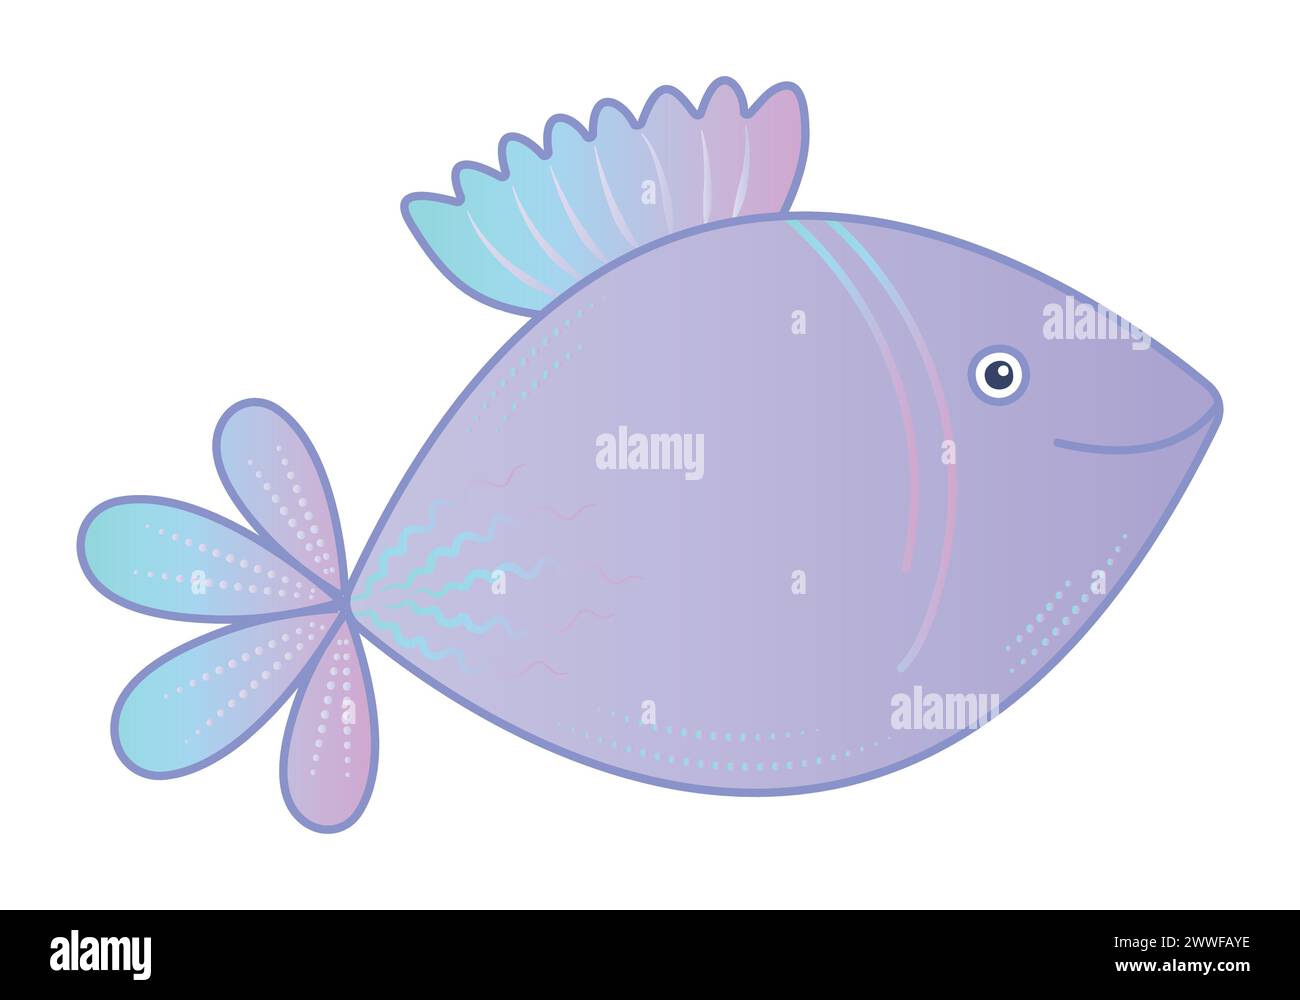 Gradient angel fish, cute nautical illustration in violet and turquoise colors Stock Vector